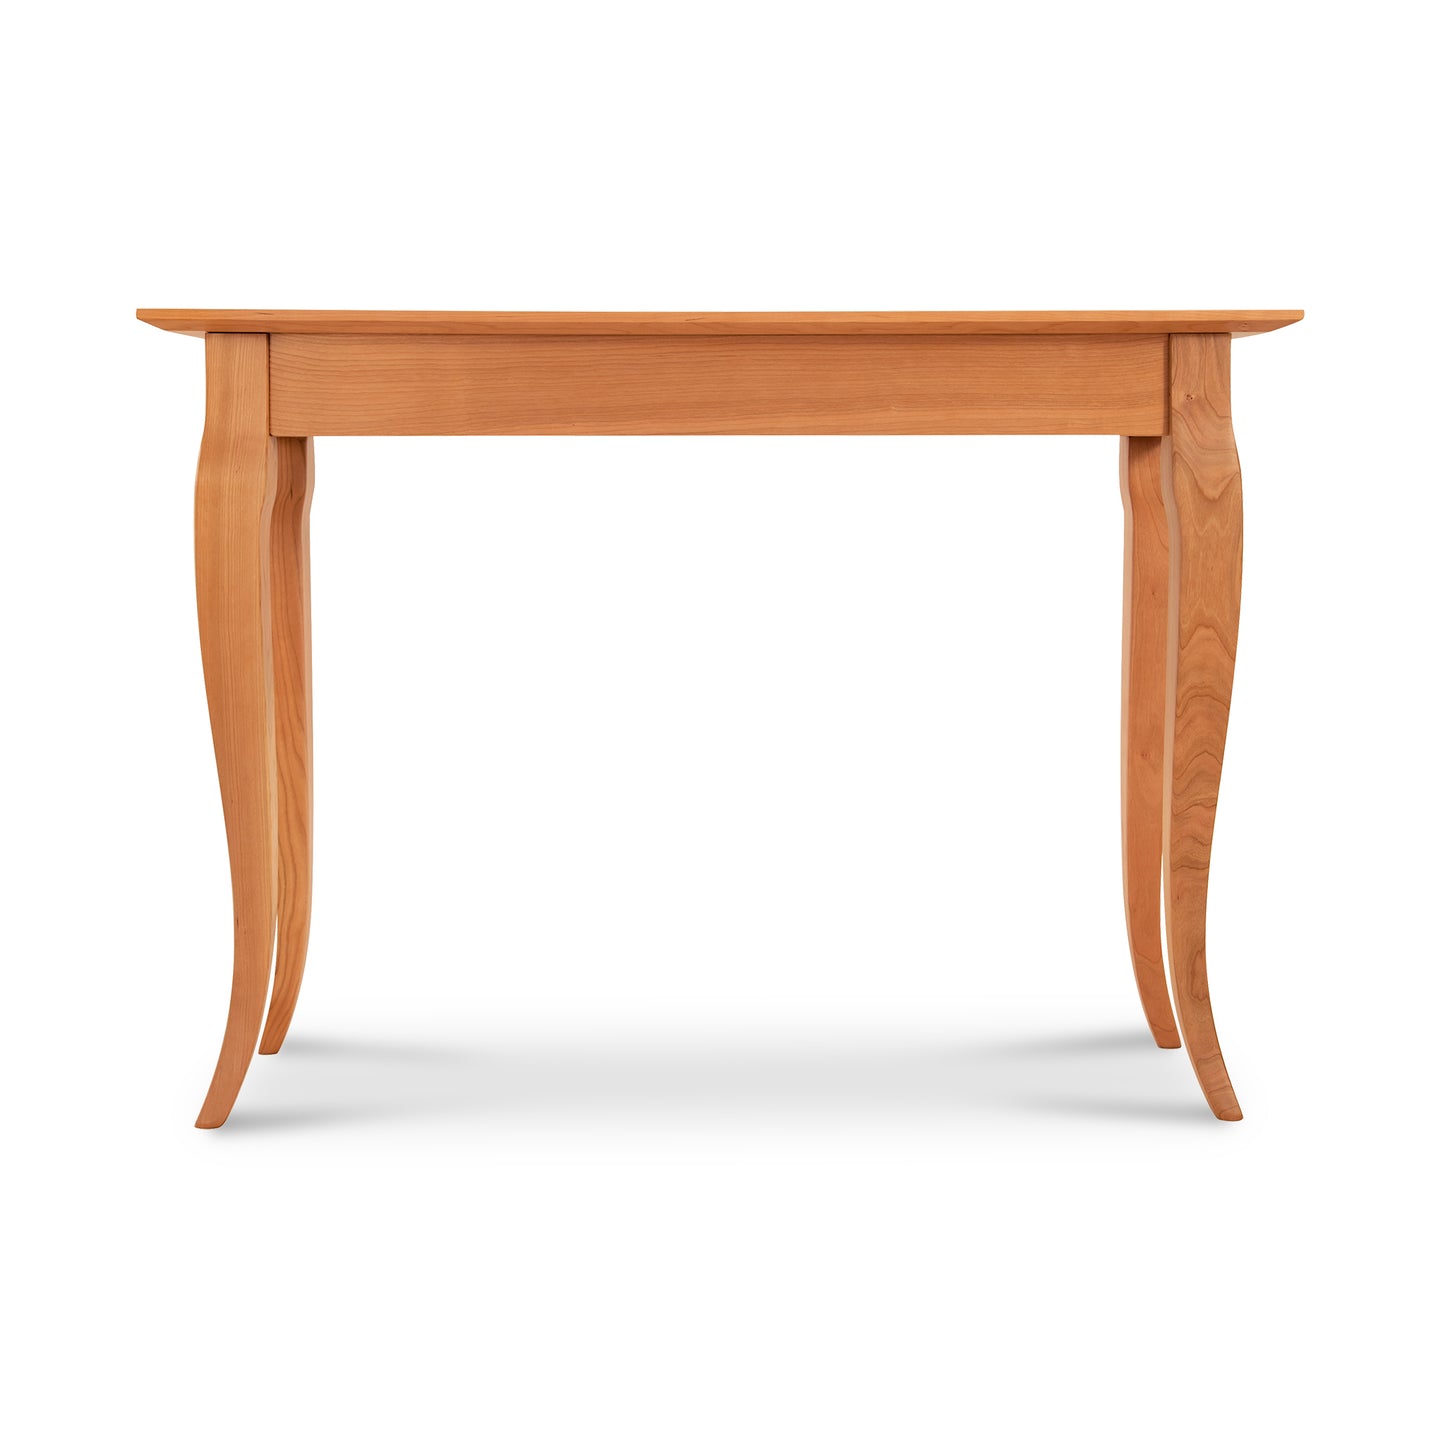 A small French Country Sofa Table with a curved top, customizable and premium-quality, by Lyndon Furniture.